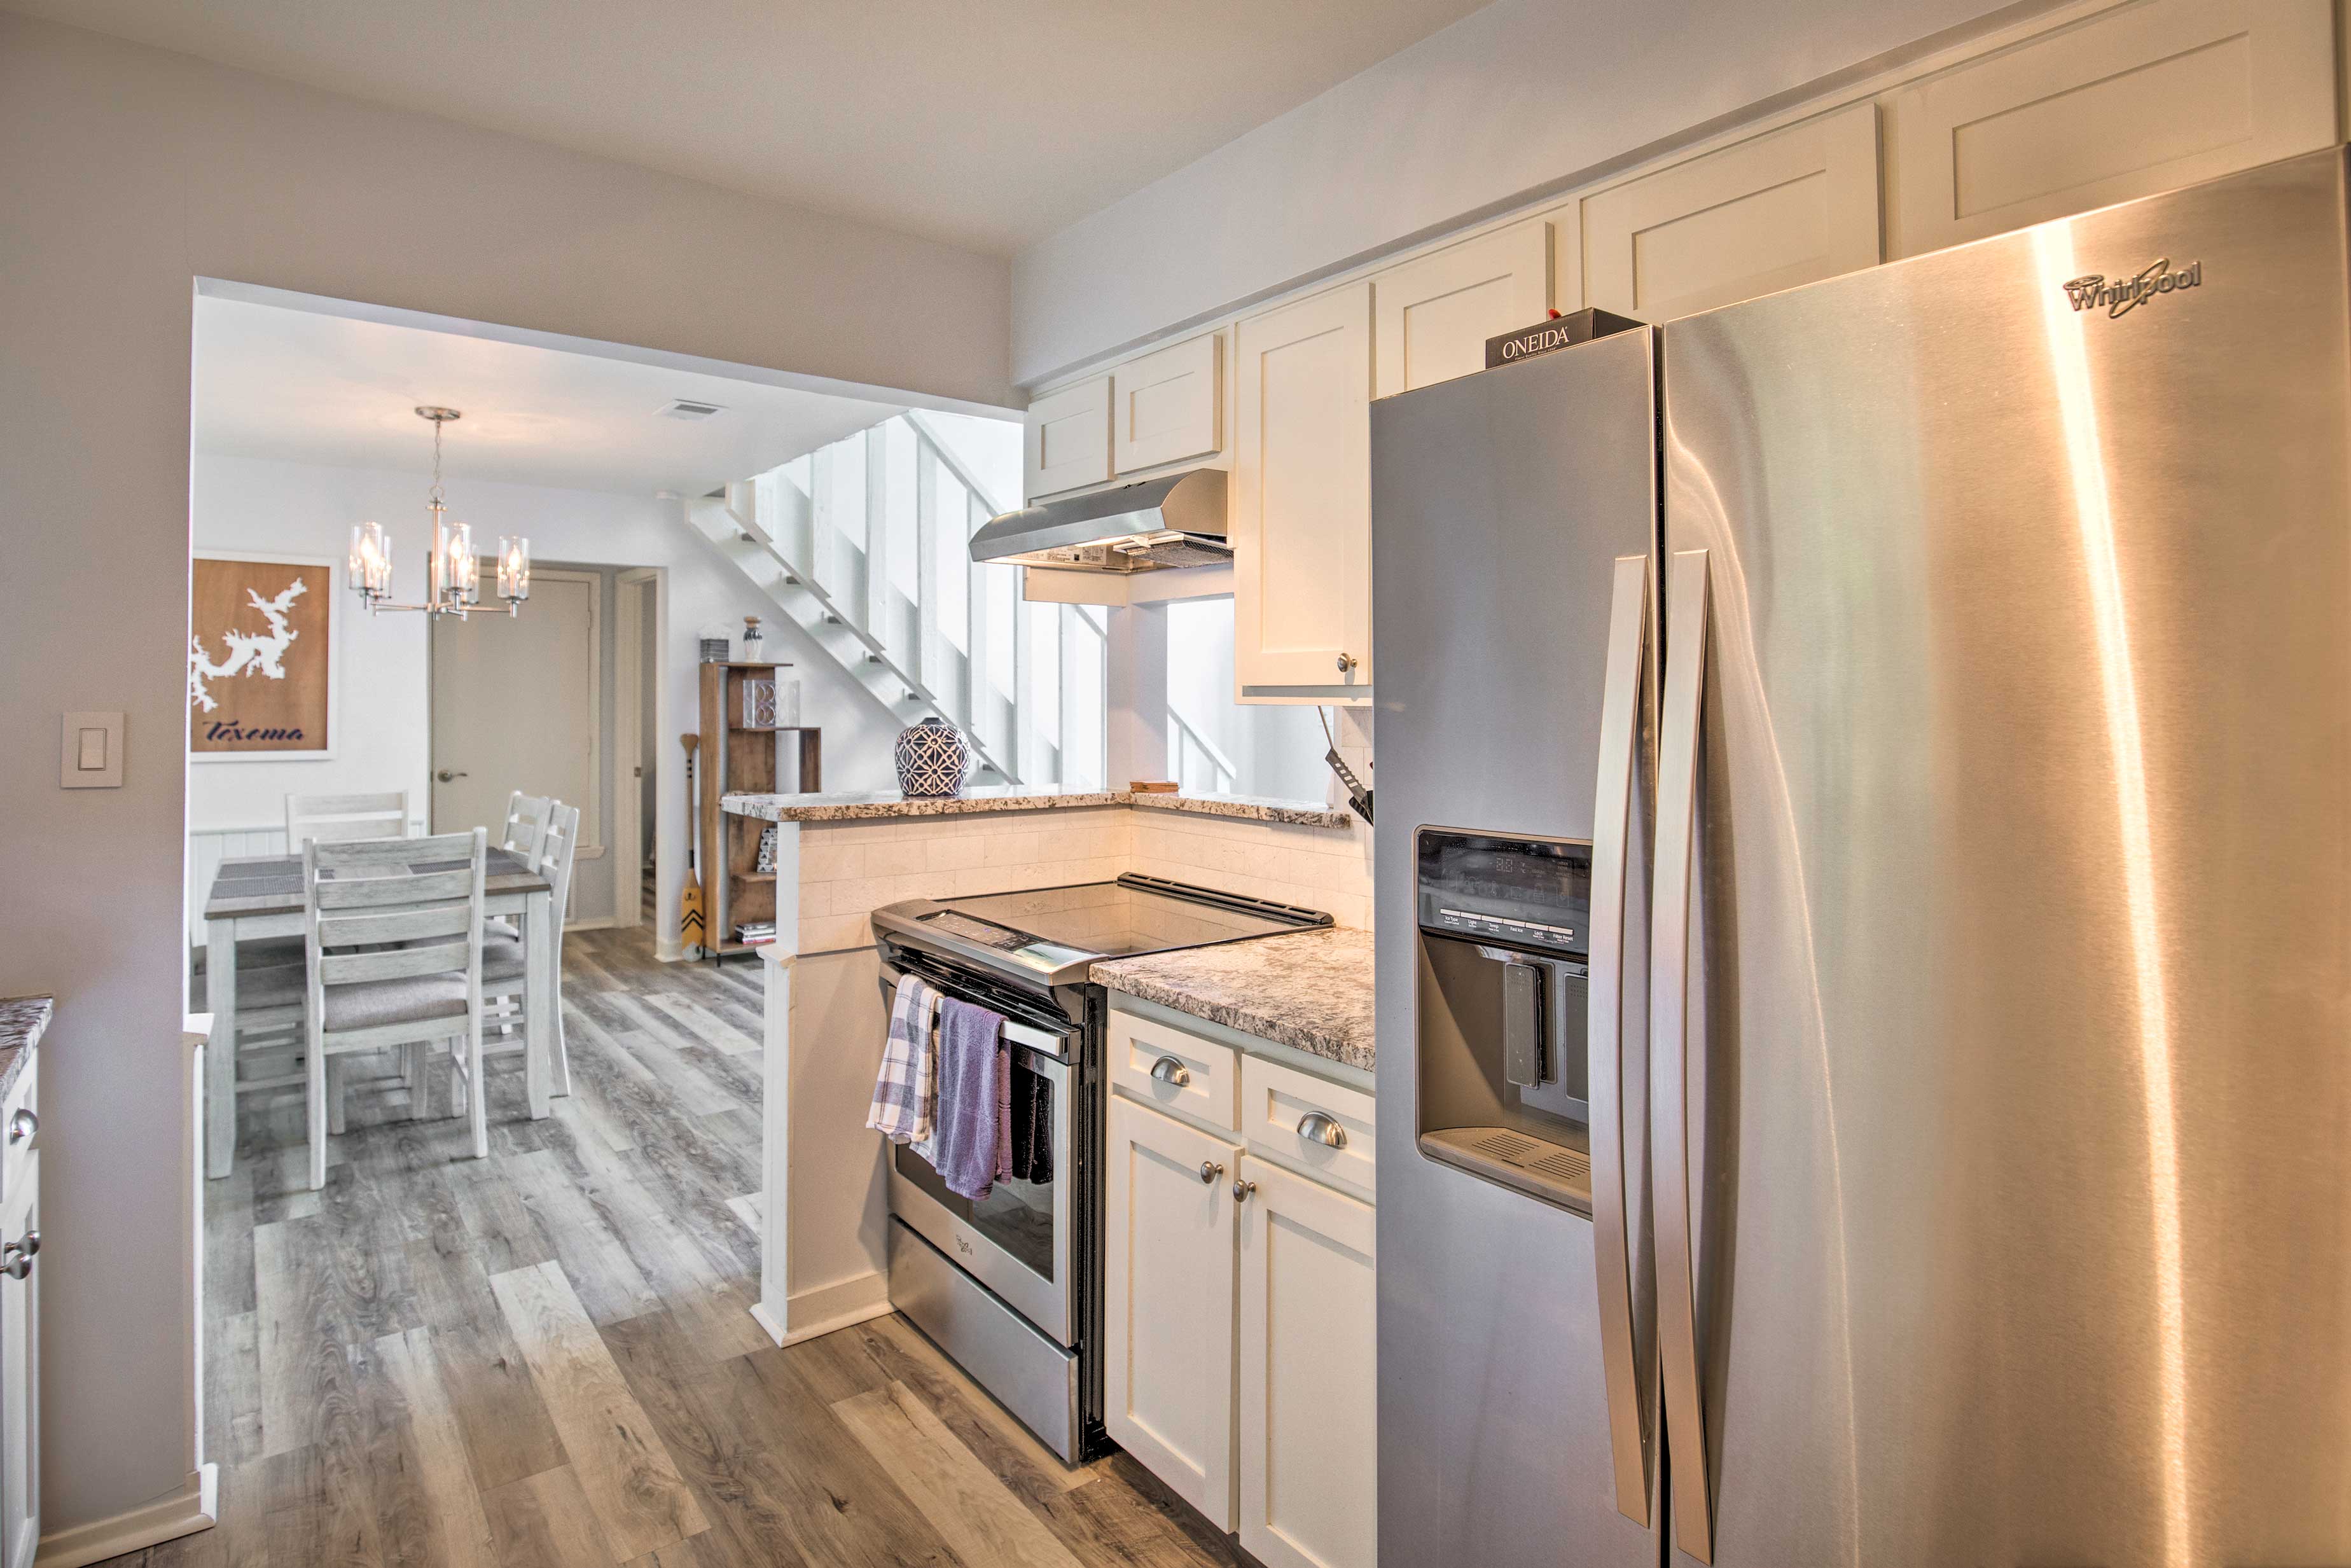 The fully equipped kitchen features stainless steel appliances.